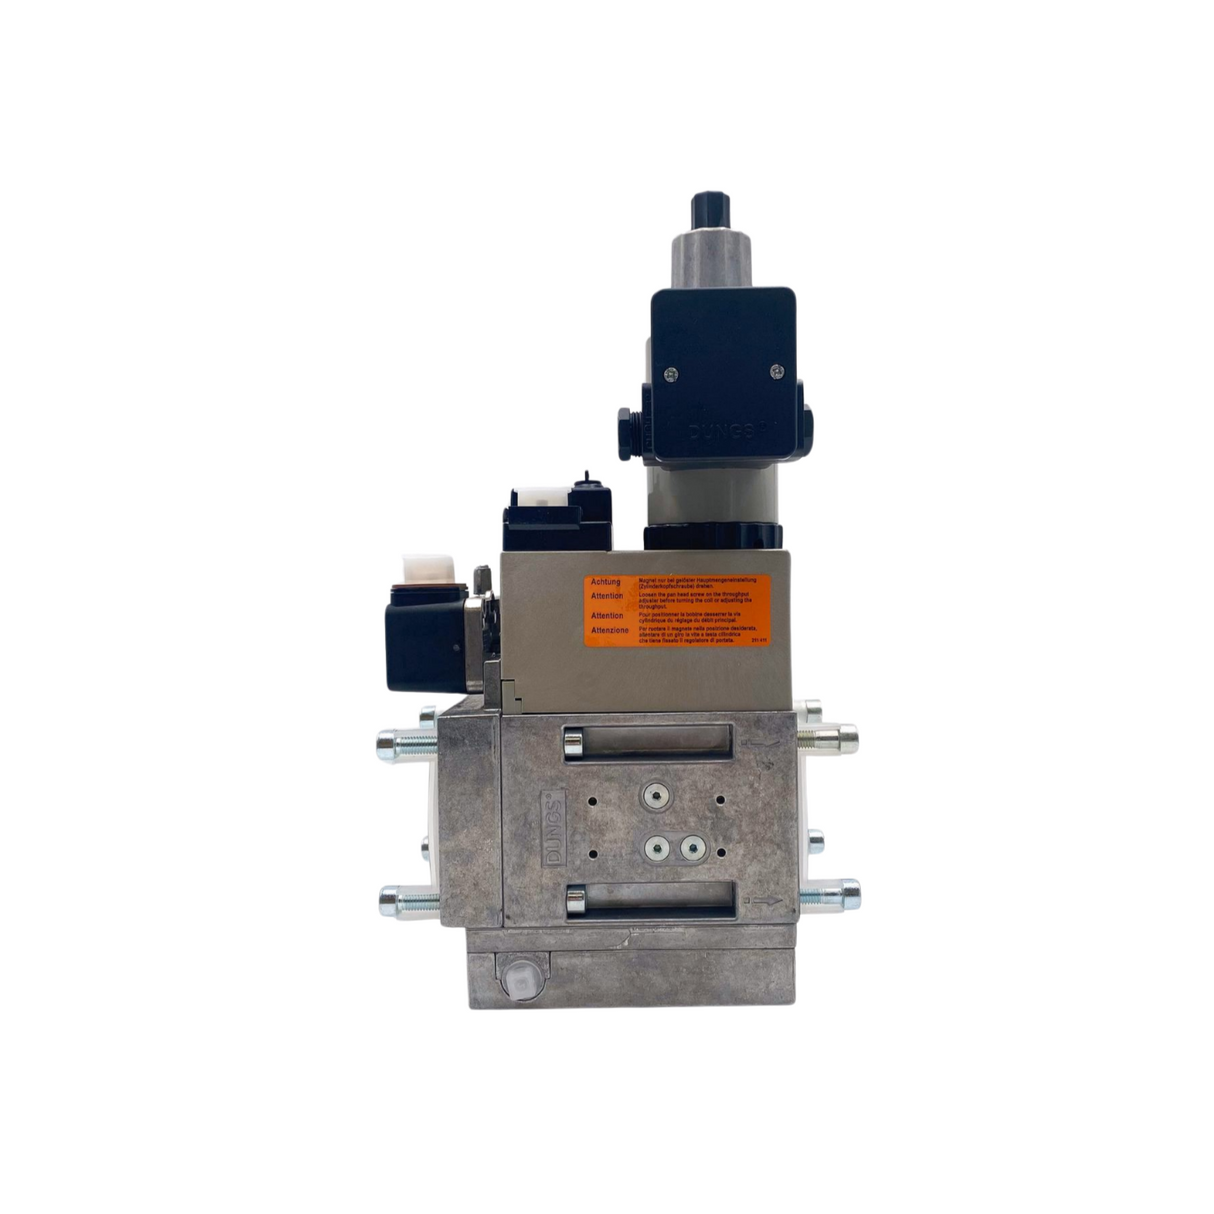 Dungs MB-ZRDLE 415 B01 S22 + GW50 A5 Multibloc Gas Valve - 110v